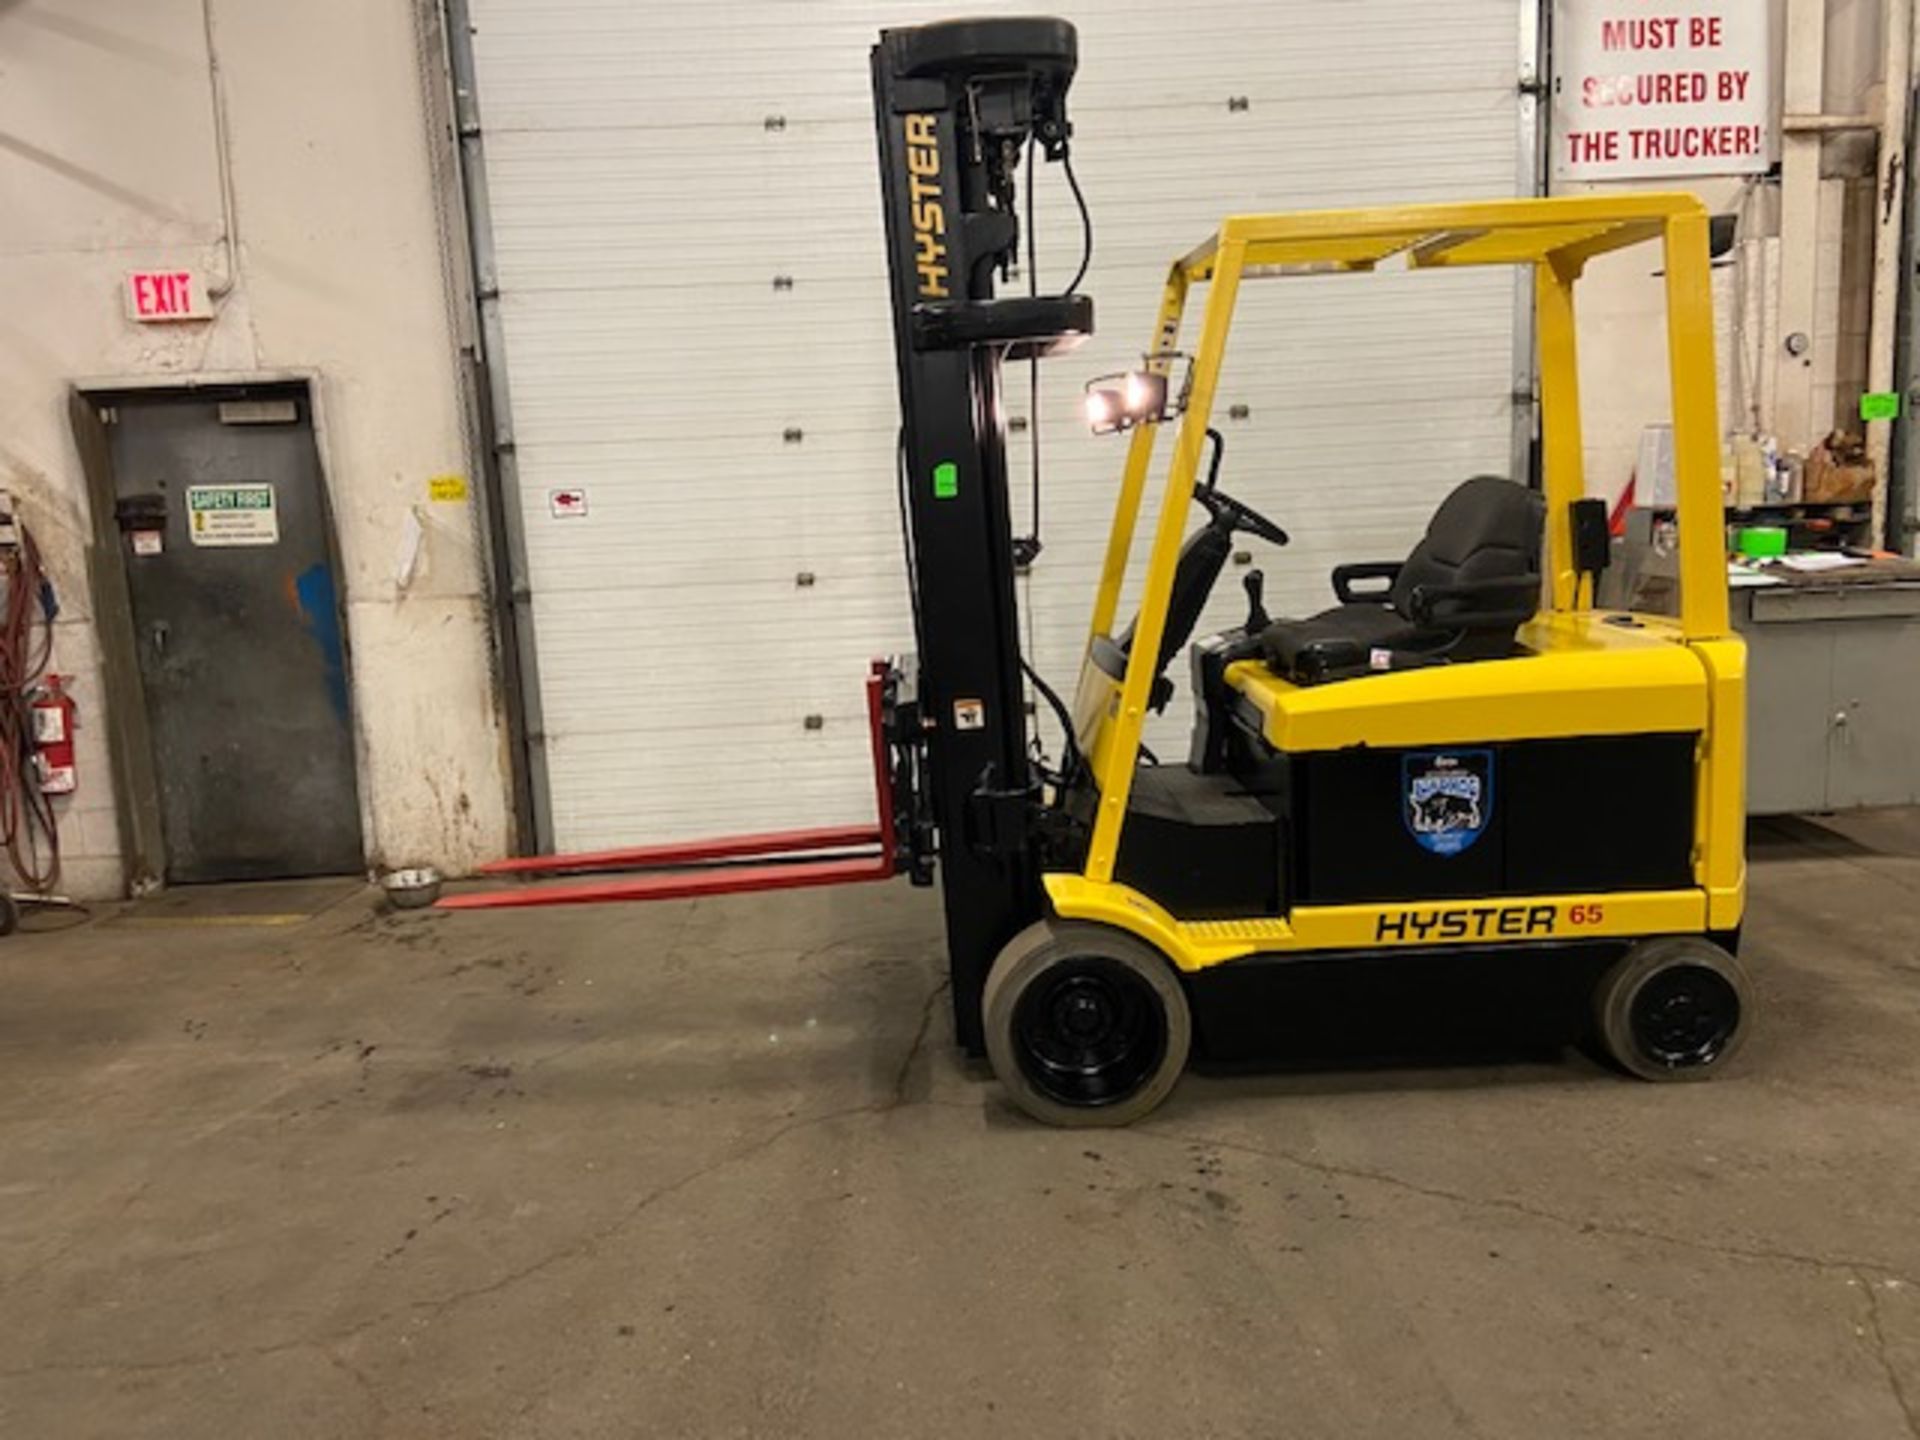 FREE CUSTOMS - Hyster 6500lbs Capacity Forklift Electric with sideshift and 4-STAGE mast with LOW